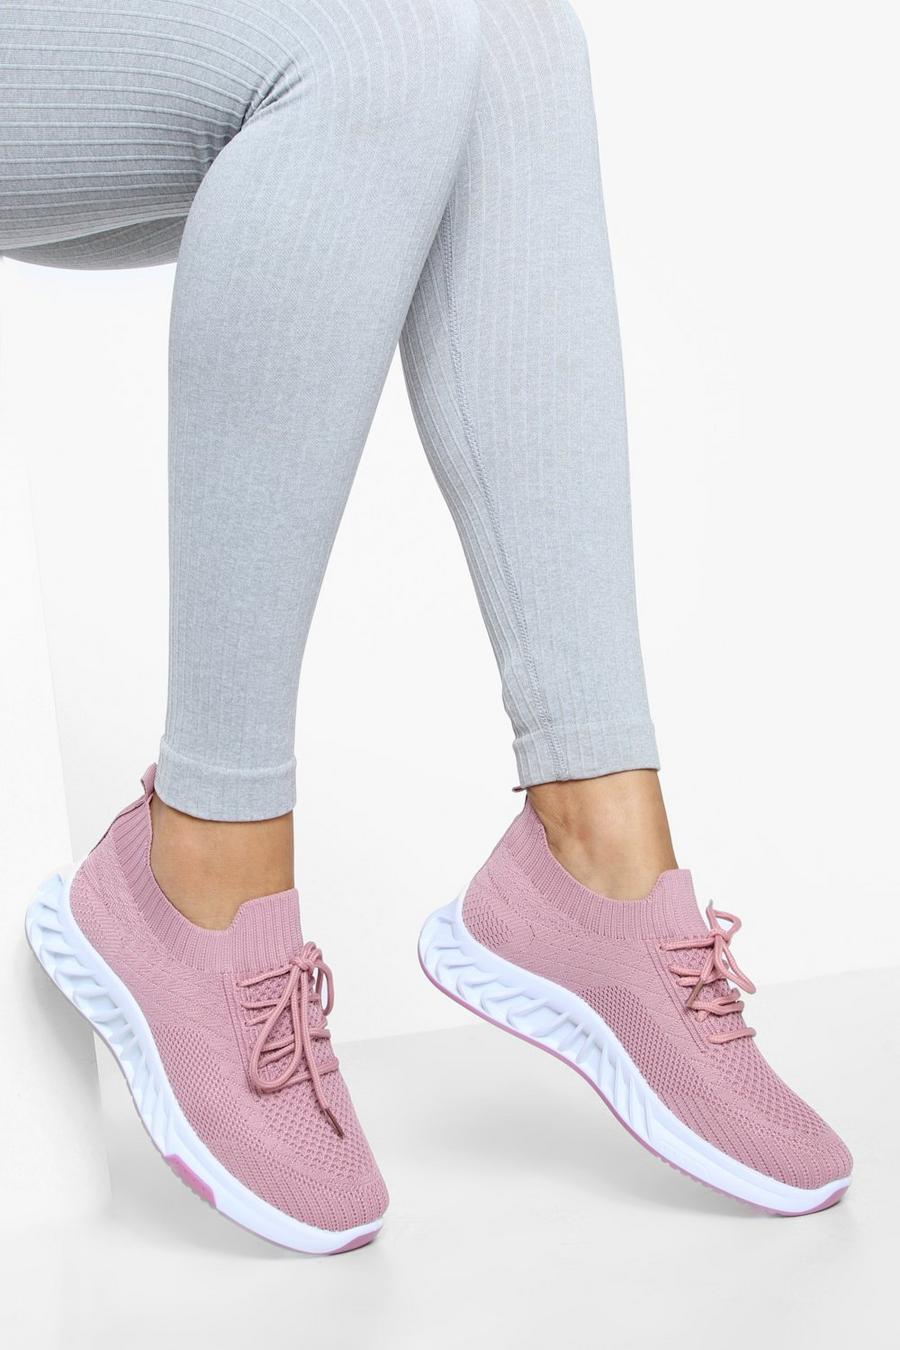 Pink rose Lace Up Knitted Sock Trainers